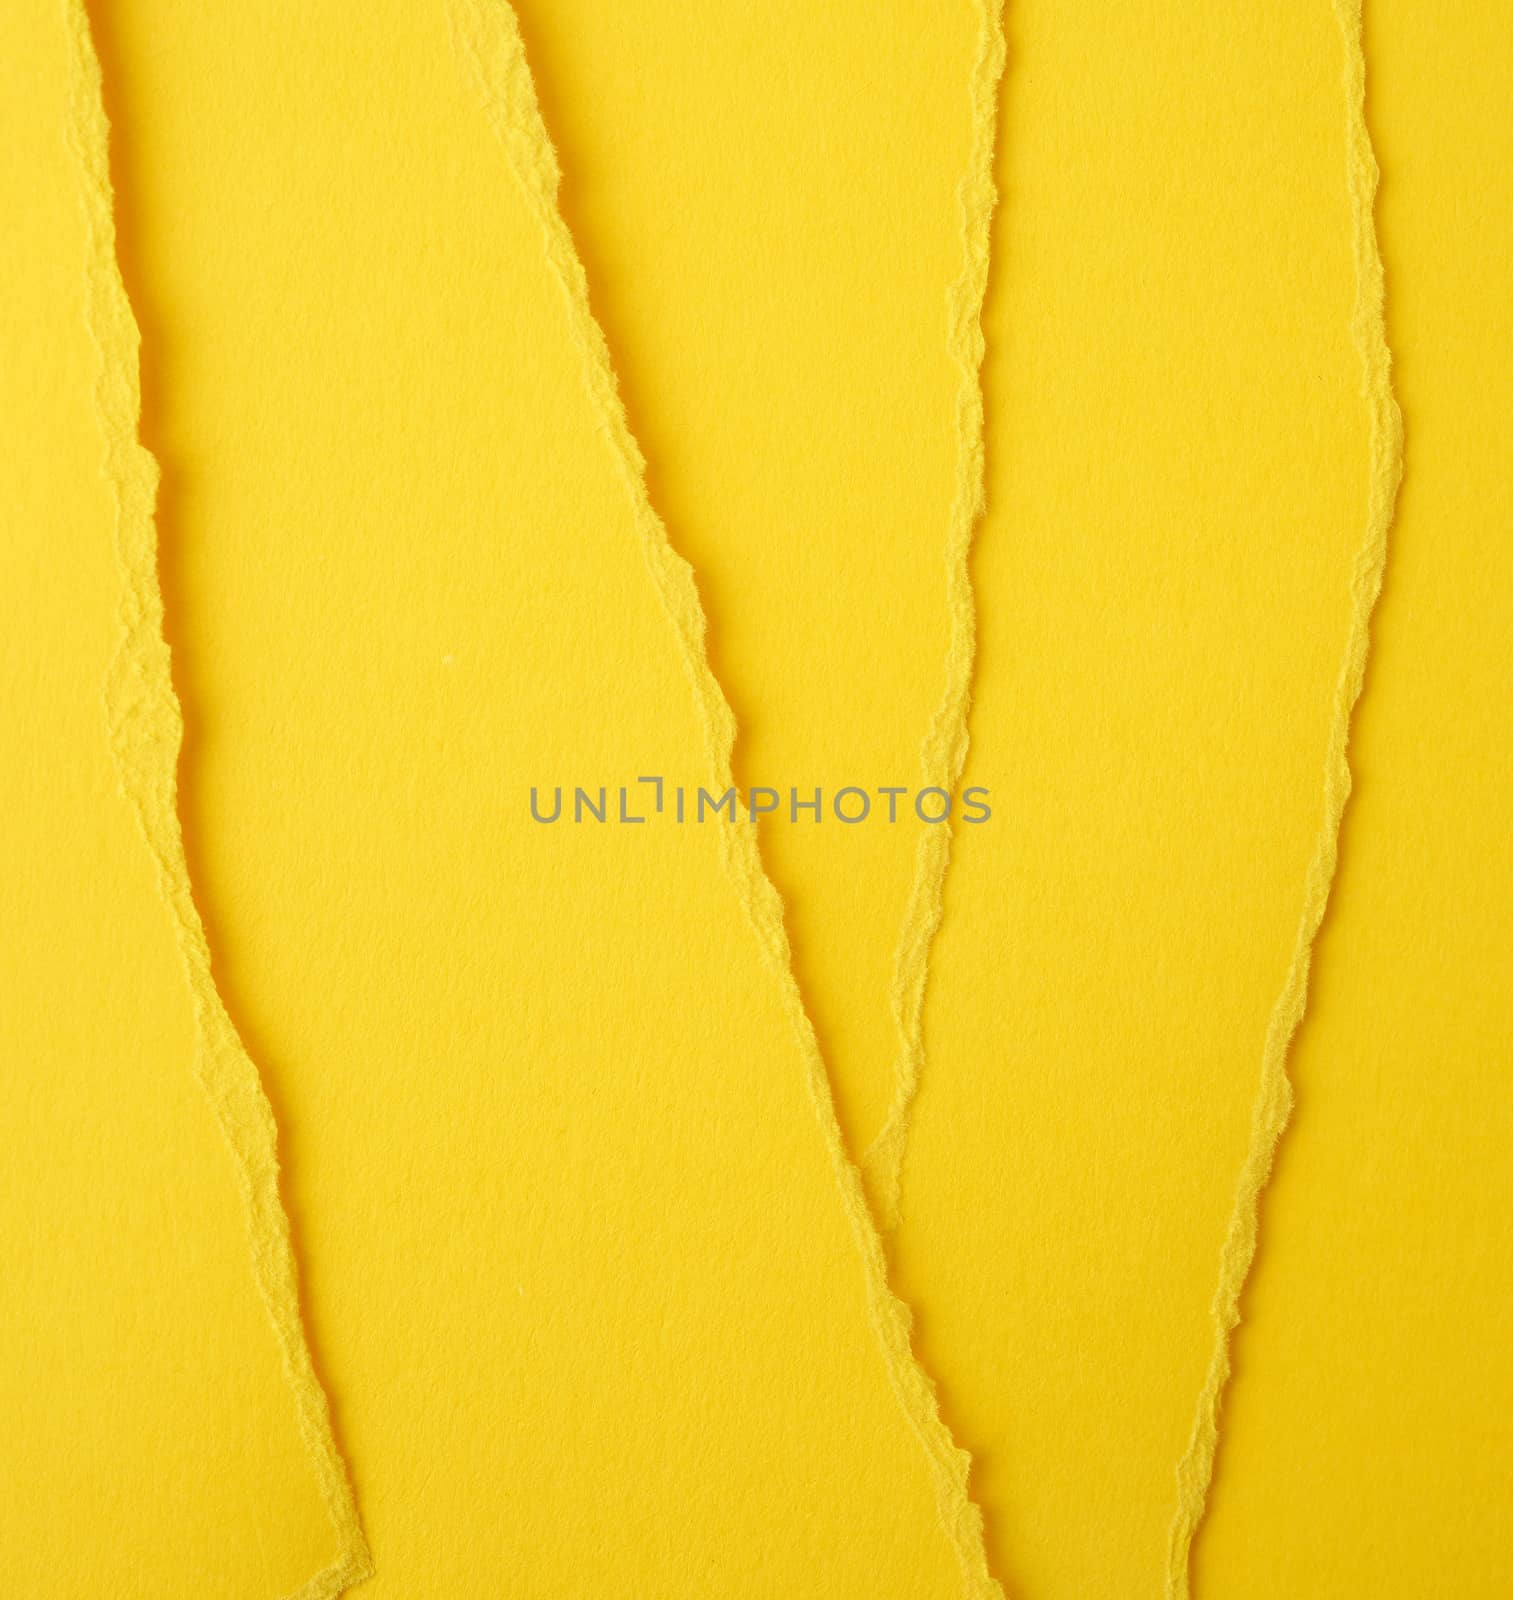 background of layered yellow torn paper with a shadow, backdrop and template for designer, close up